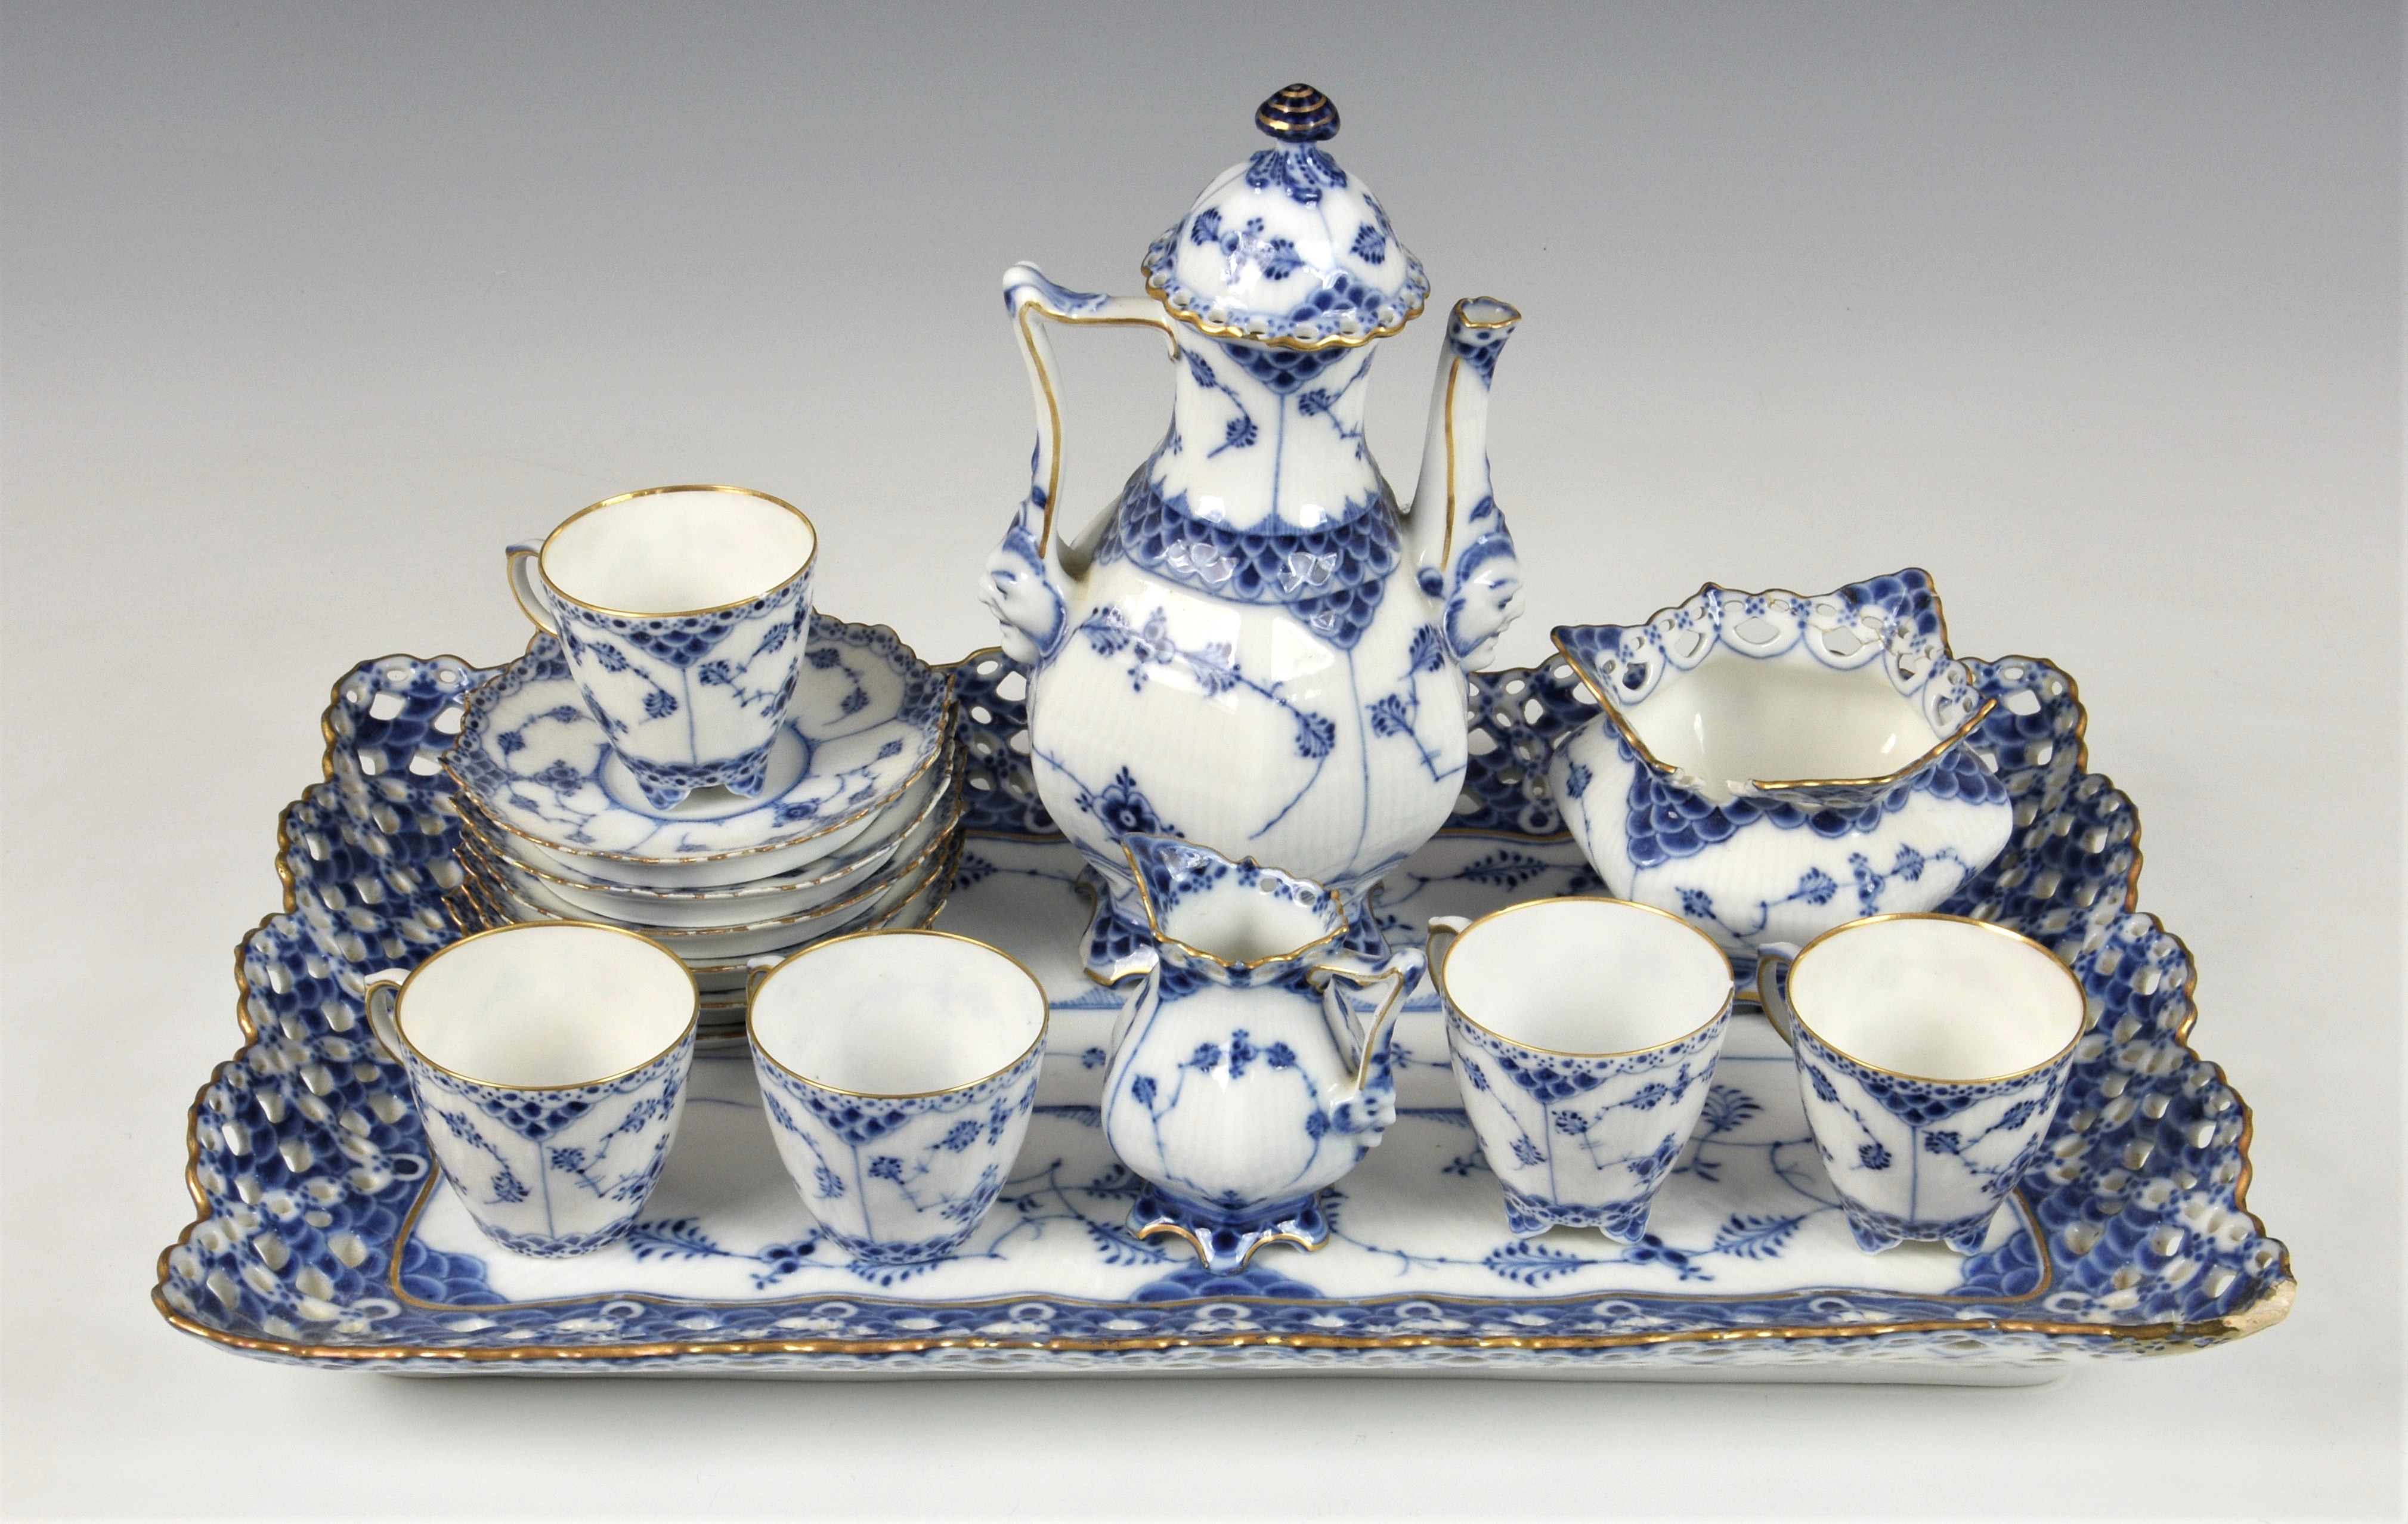 A Royal Copenhagen cabaret set in Blue Full Face pattern, each piece enriched with blue and white